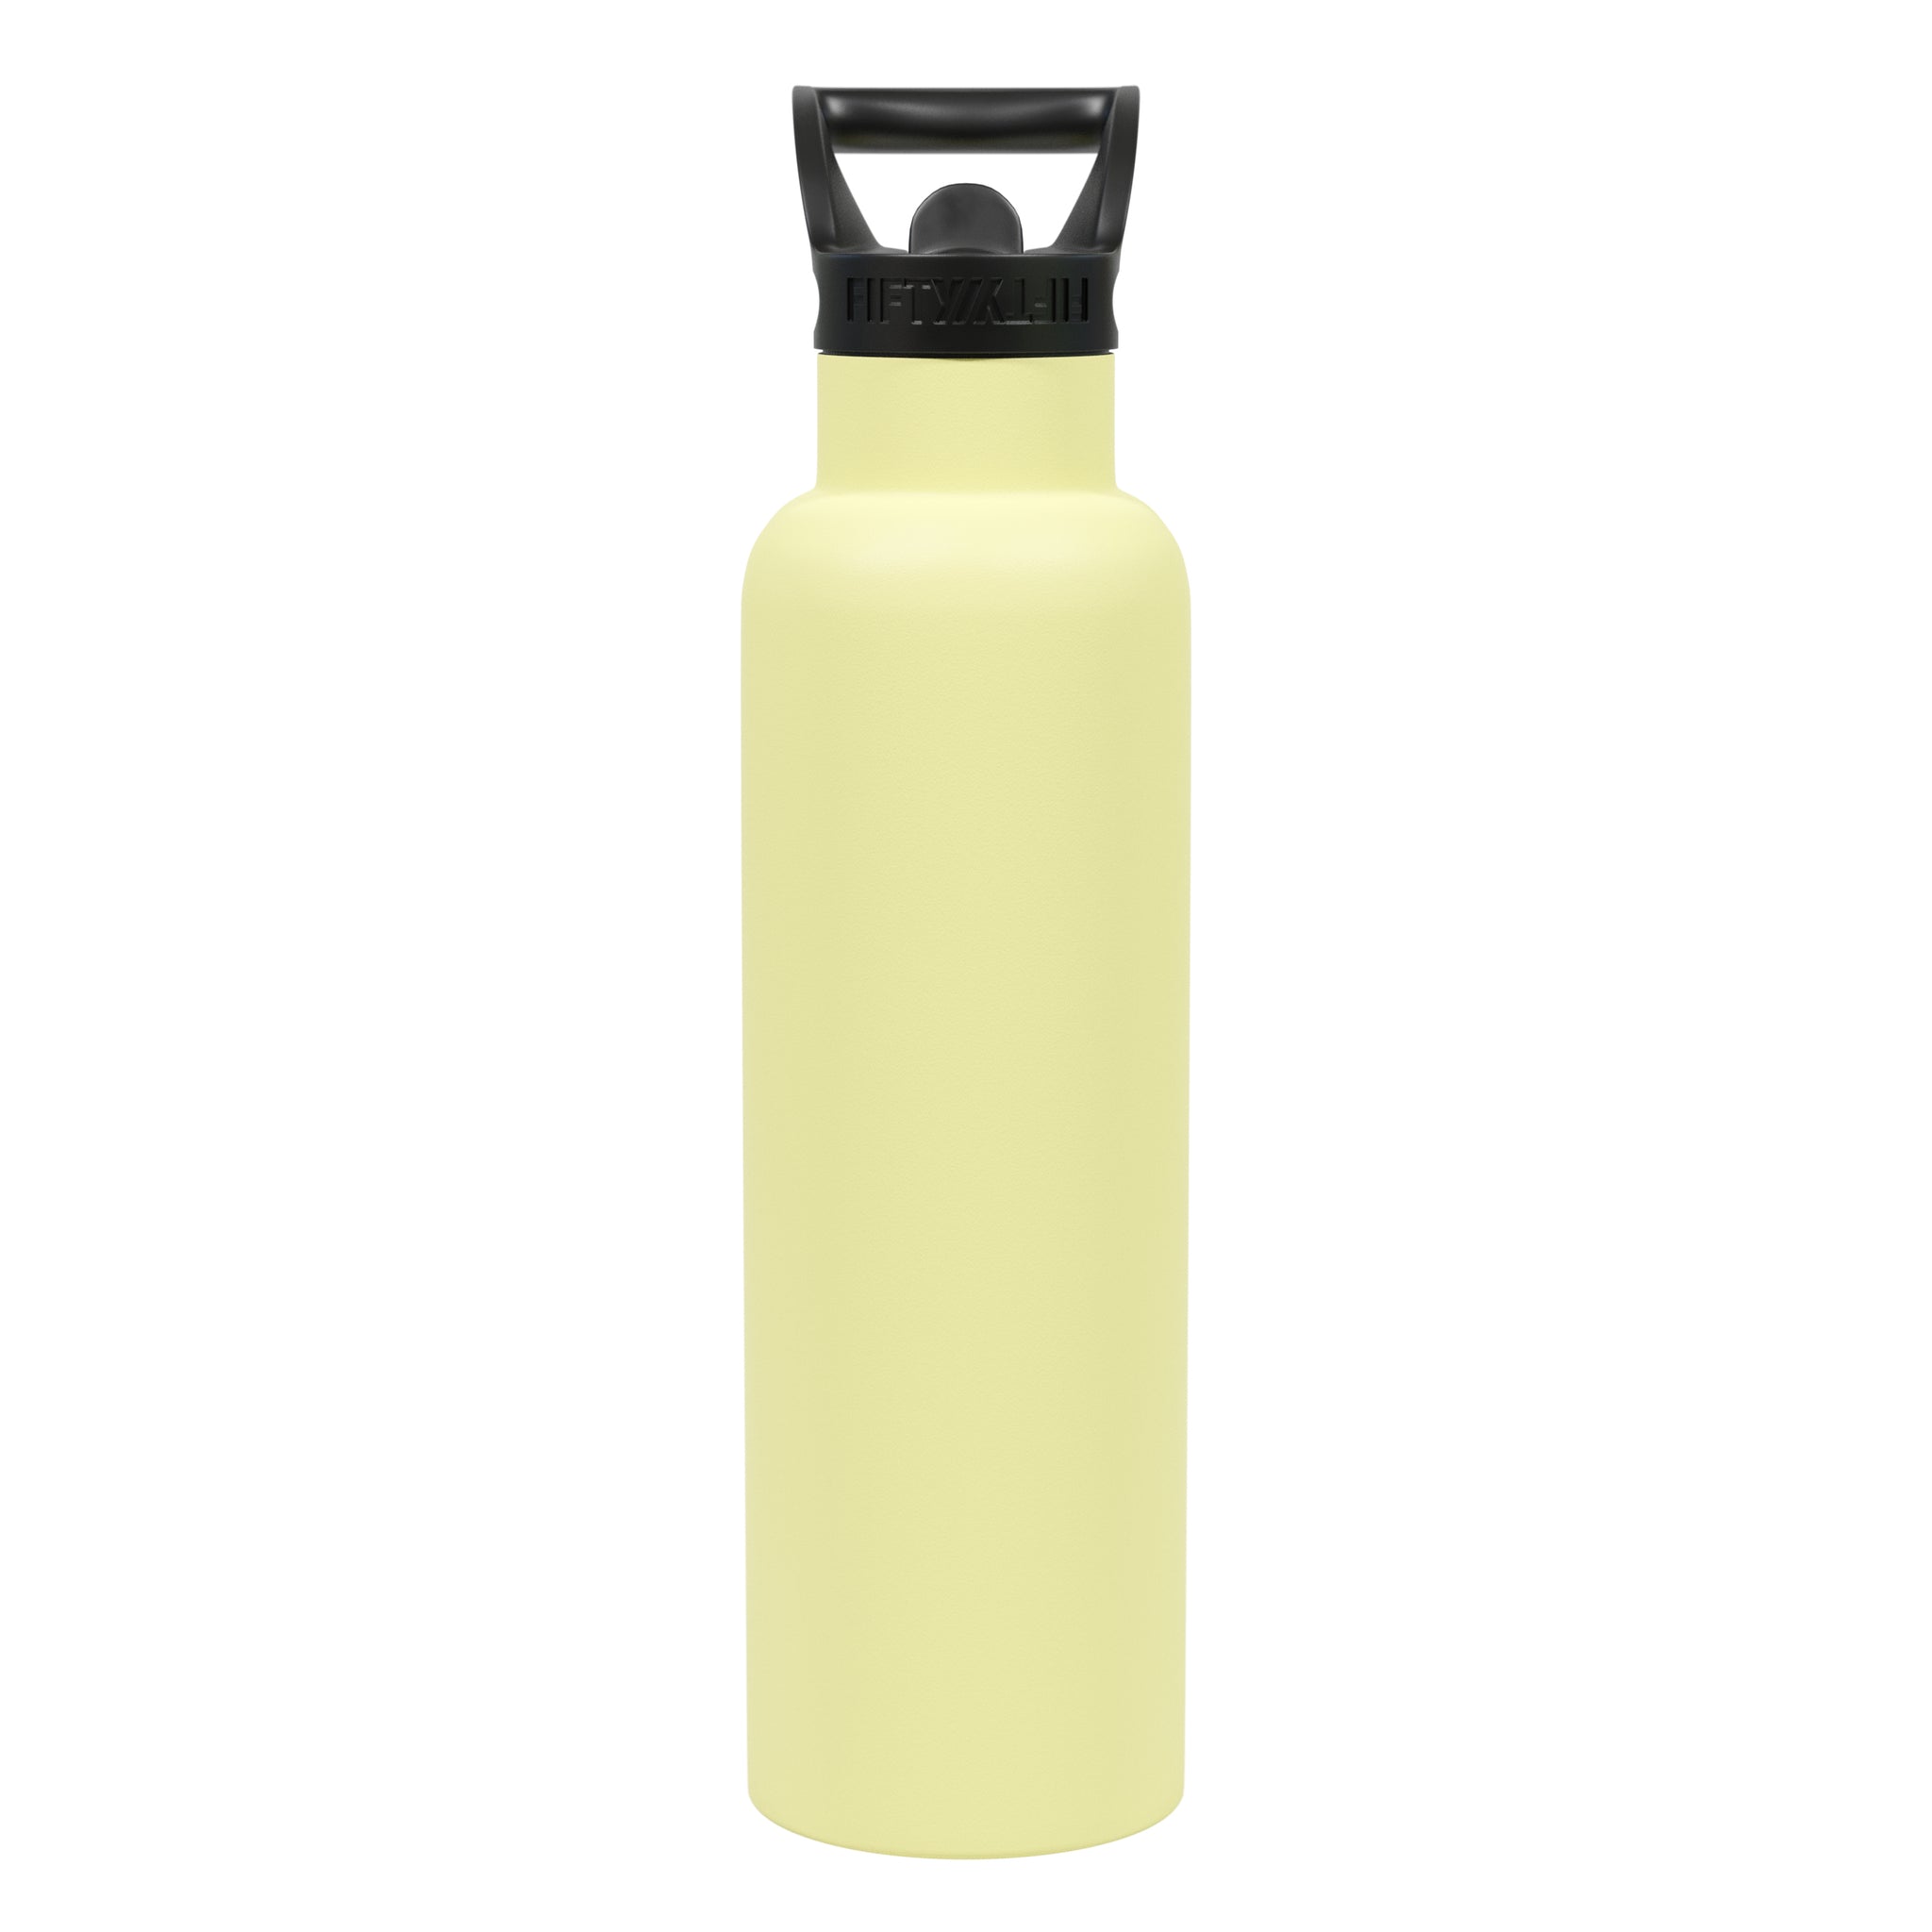 Vacuum Insulated Stainless Steel Water Bottle Industry Standard